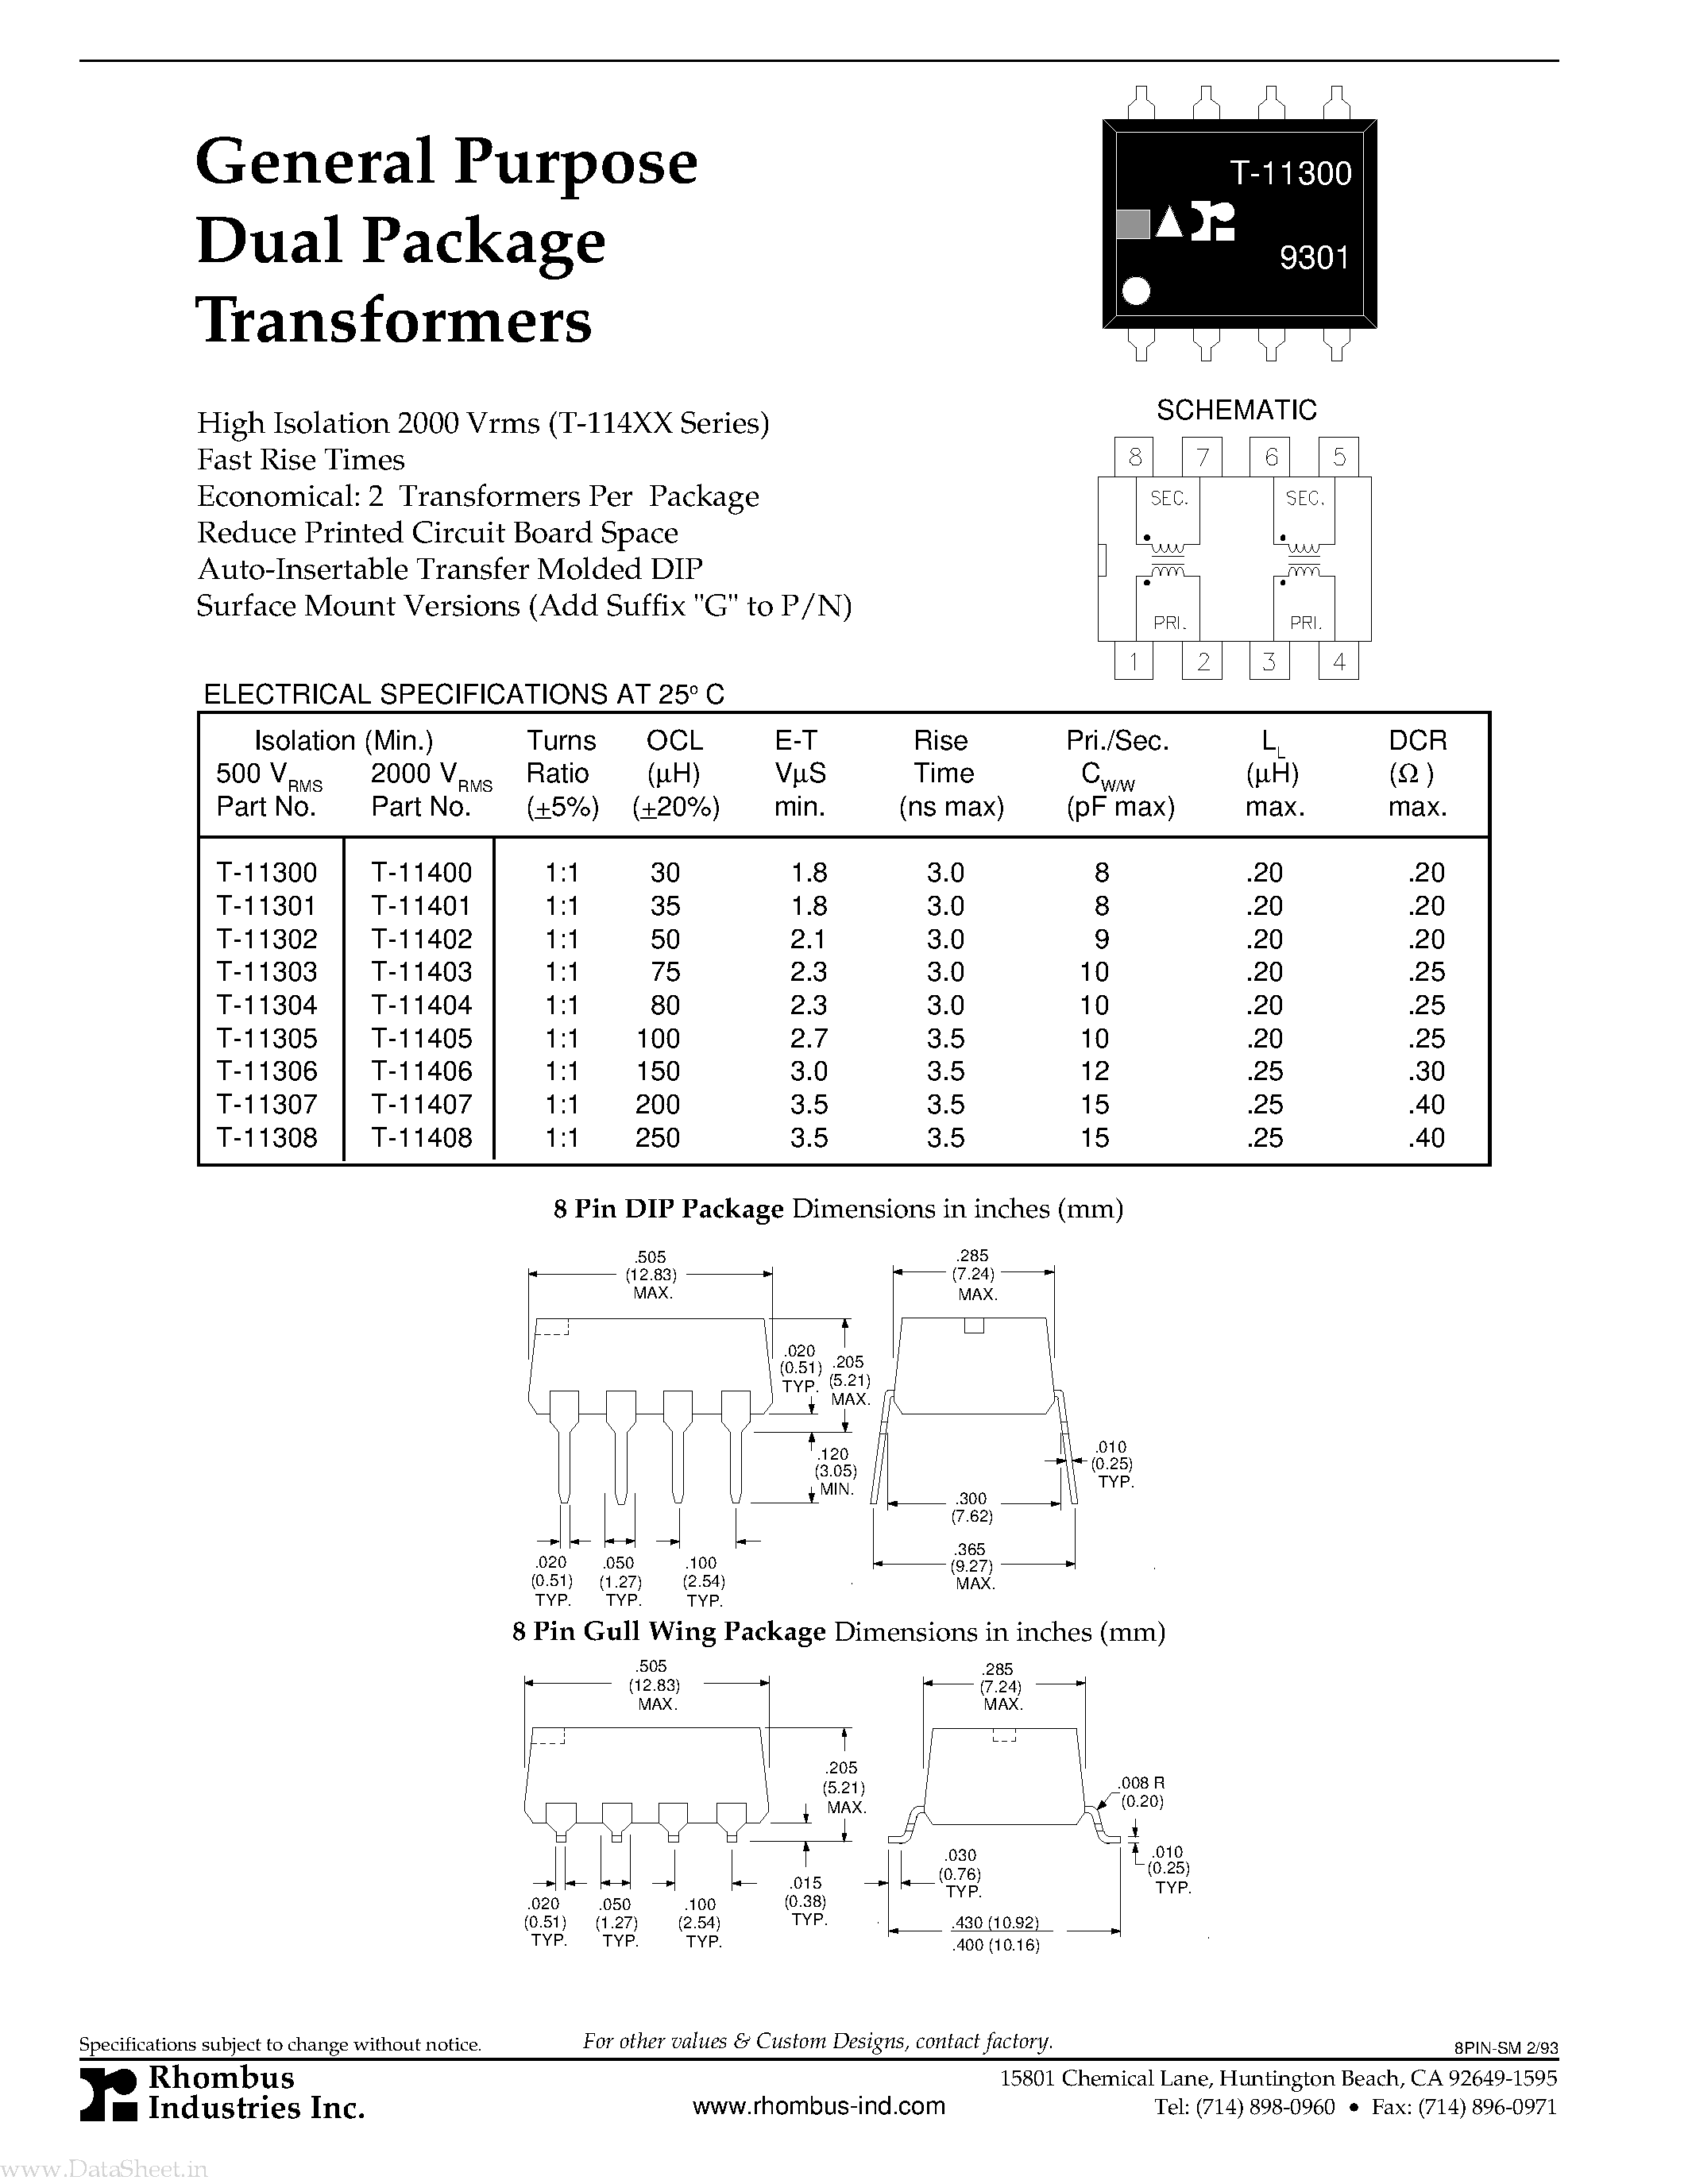 Datasheet T-11300 - (T-11400 - T-11408) General Purpose Dual Package Transformers page 1